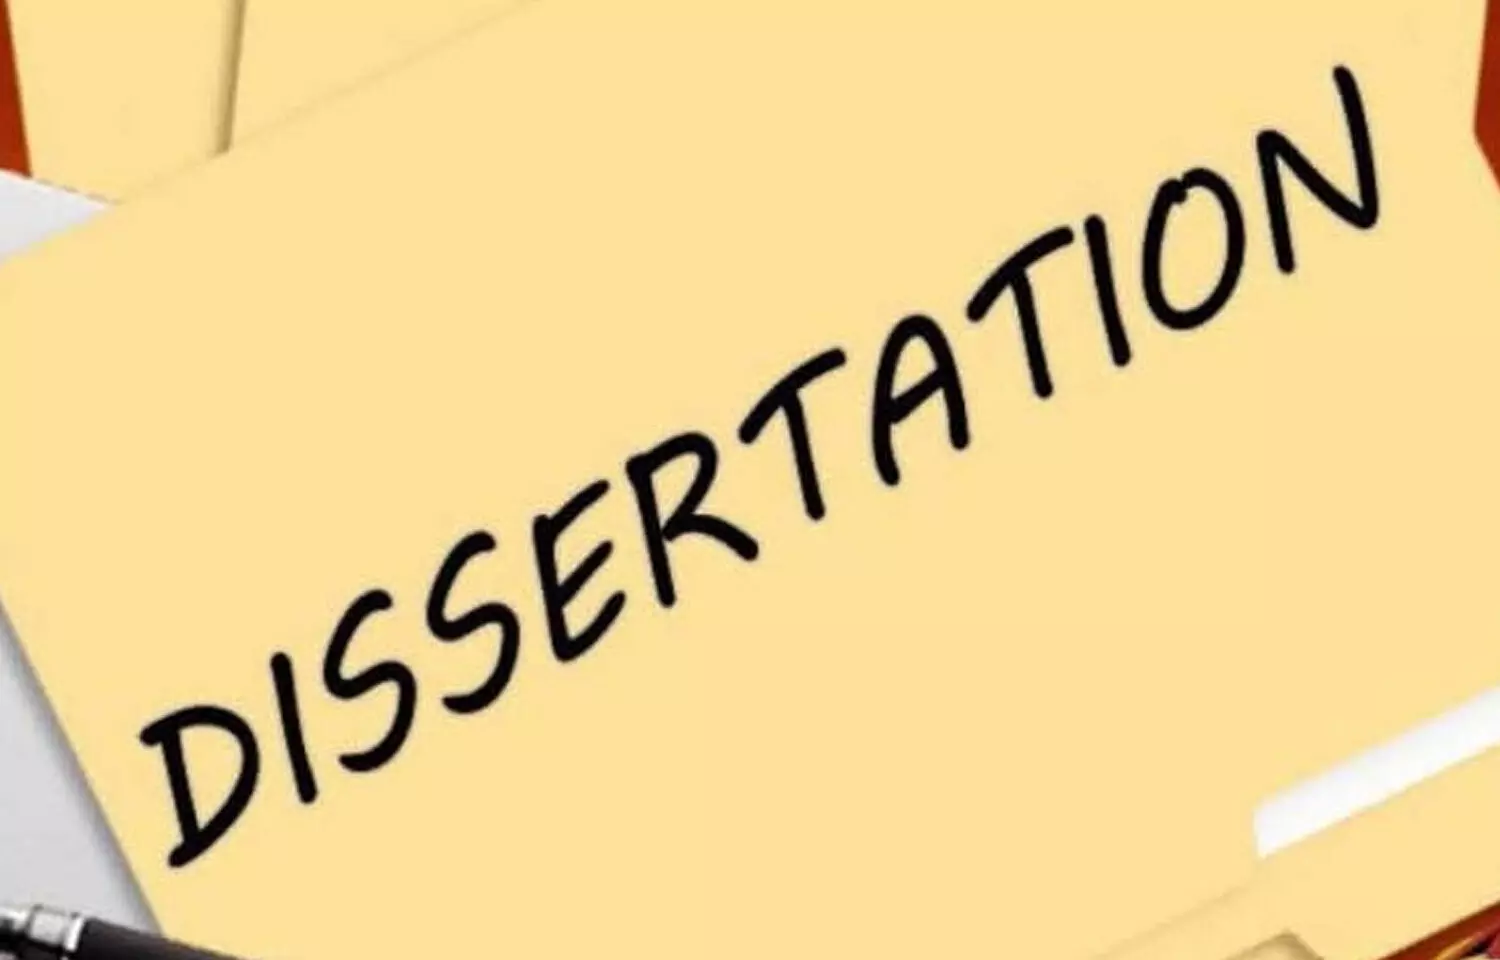 RGUHS informs on Submission Of Dissertations For PG AYUSH Courses